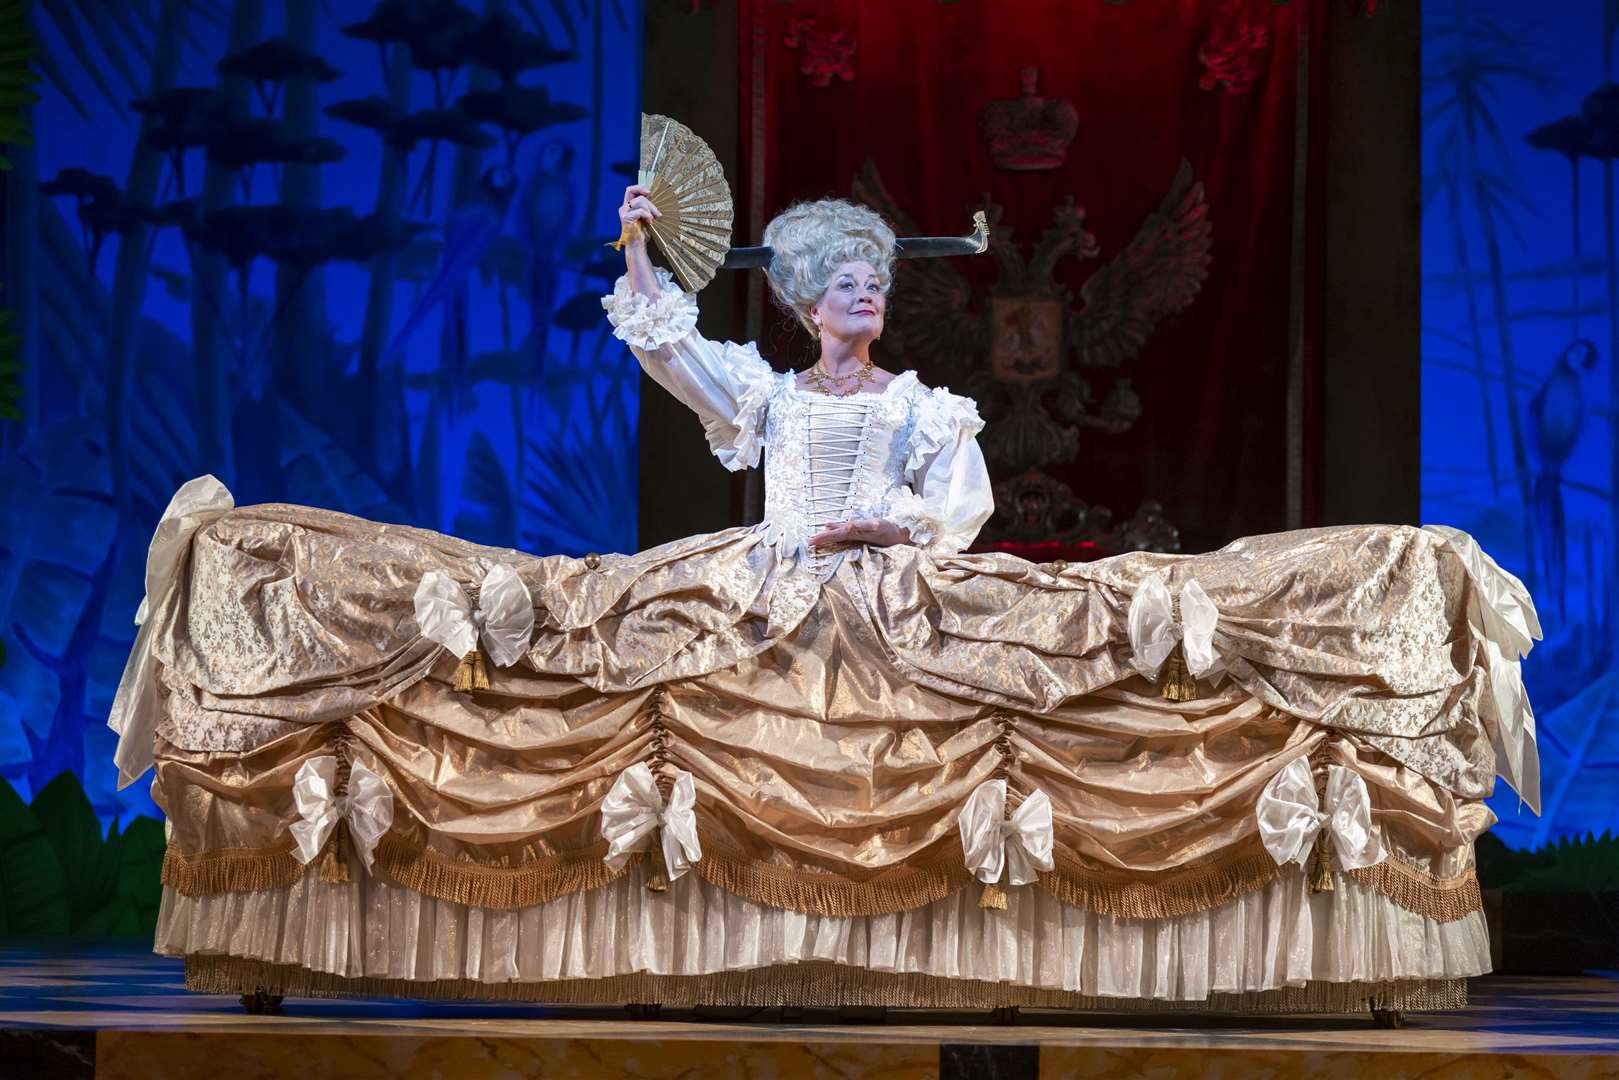 Yvonne Howard as the Duchess of Plaza-Toro in her stunning dress (on wheels)! in The Gondoliers.